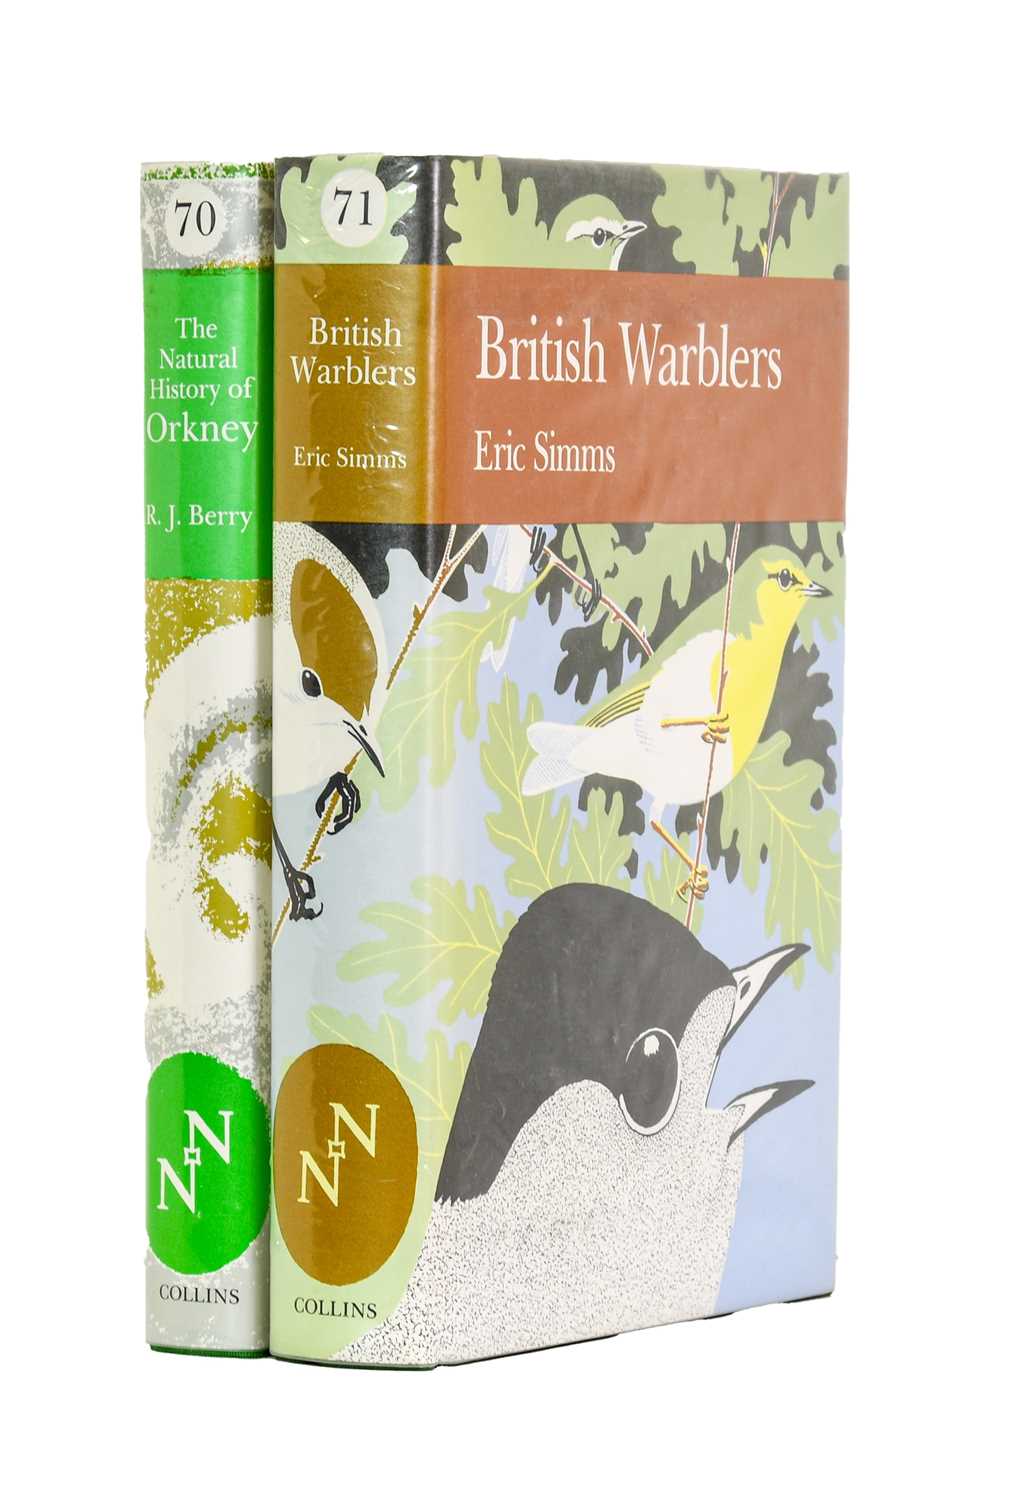 Lot 75 - New Naturalists. The Natural History of Orkney & British Warblers, 1st editions, 1985